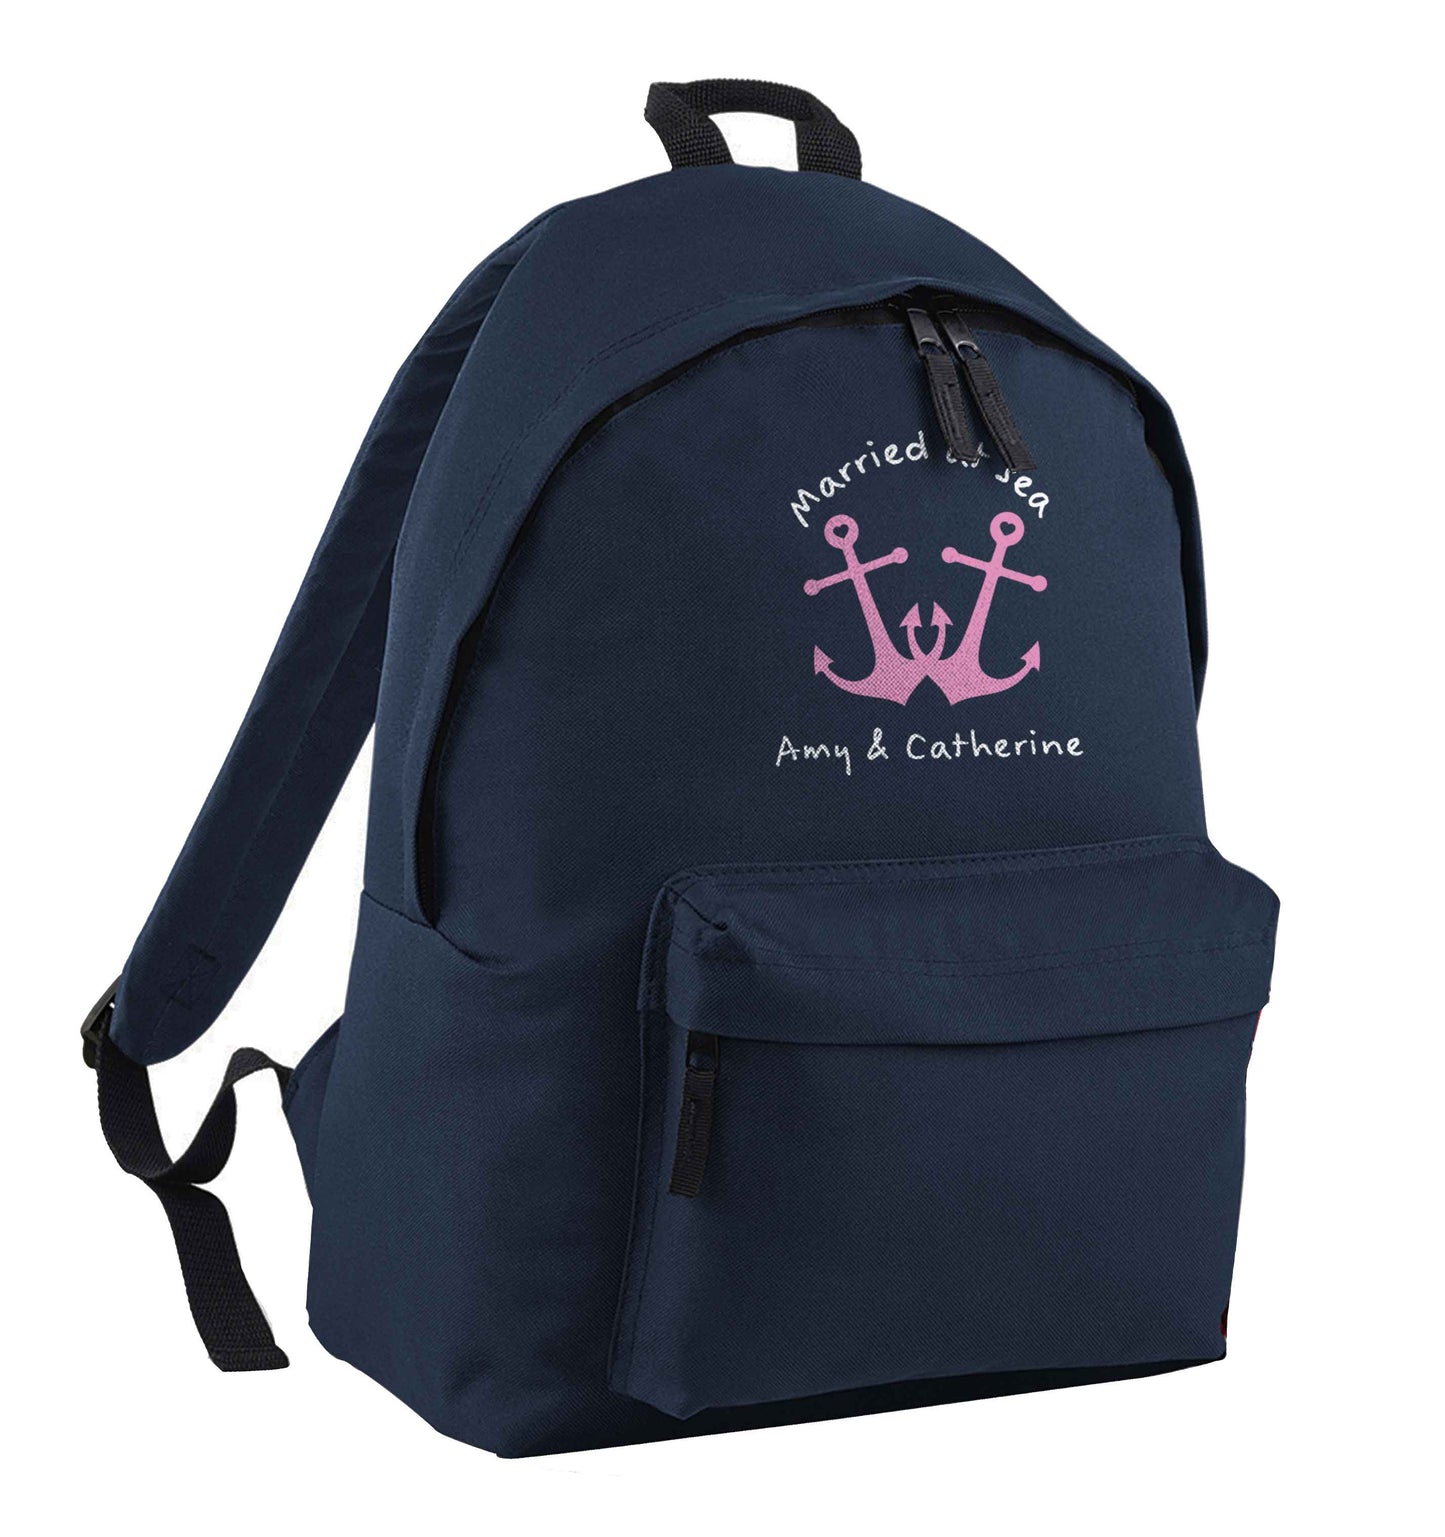 Married at sea pink anchors navy adults backpack